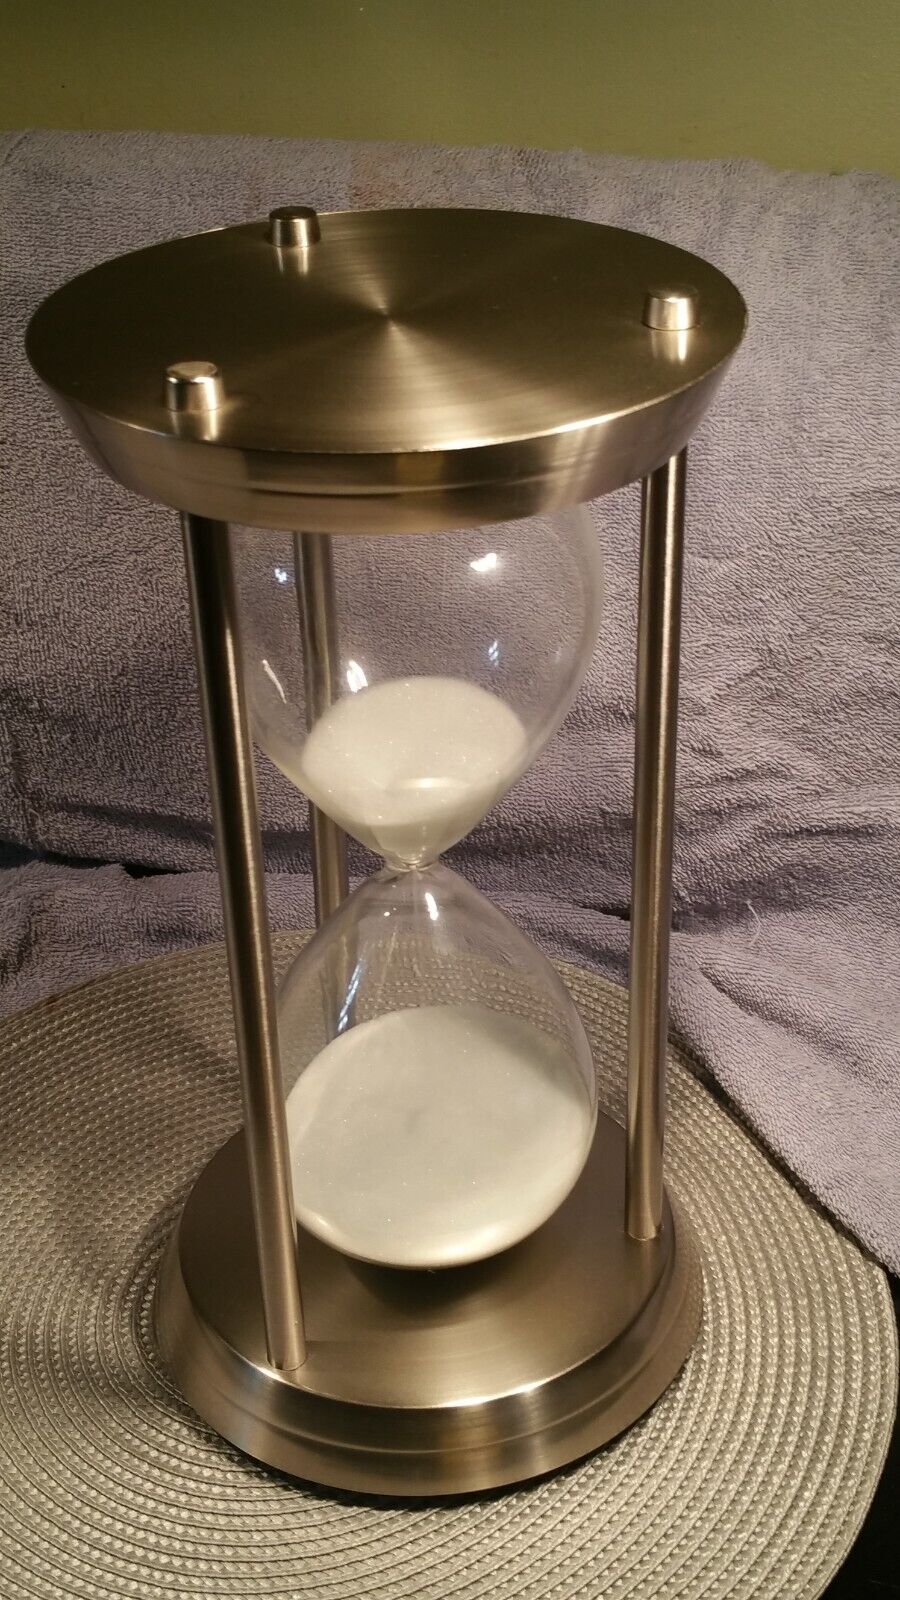  Stainless steel, glass and sand hour glass in excellent condition